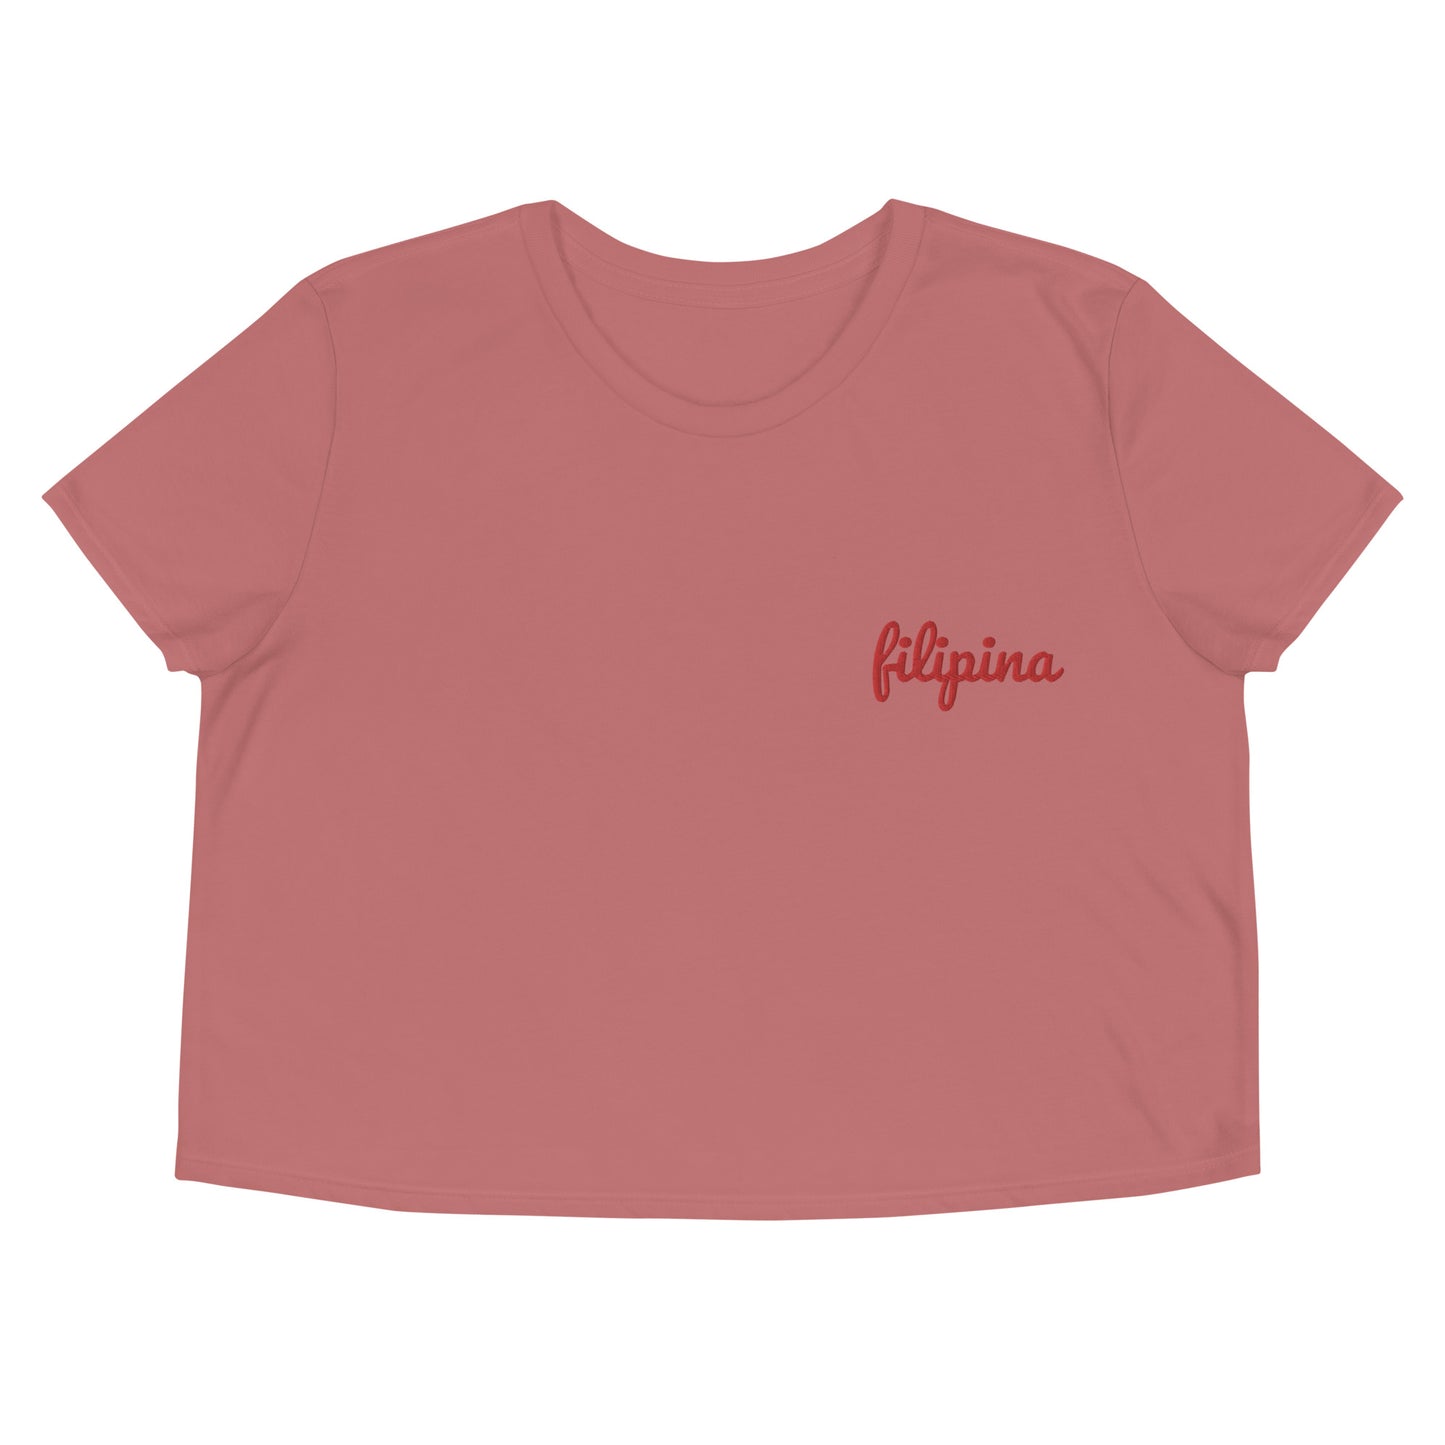 Filipino Flowy Crop Shirt Filipina Statement Embroidered Merch in color variant Mauve